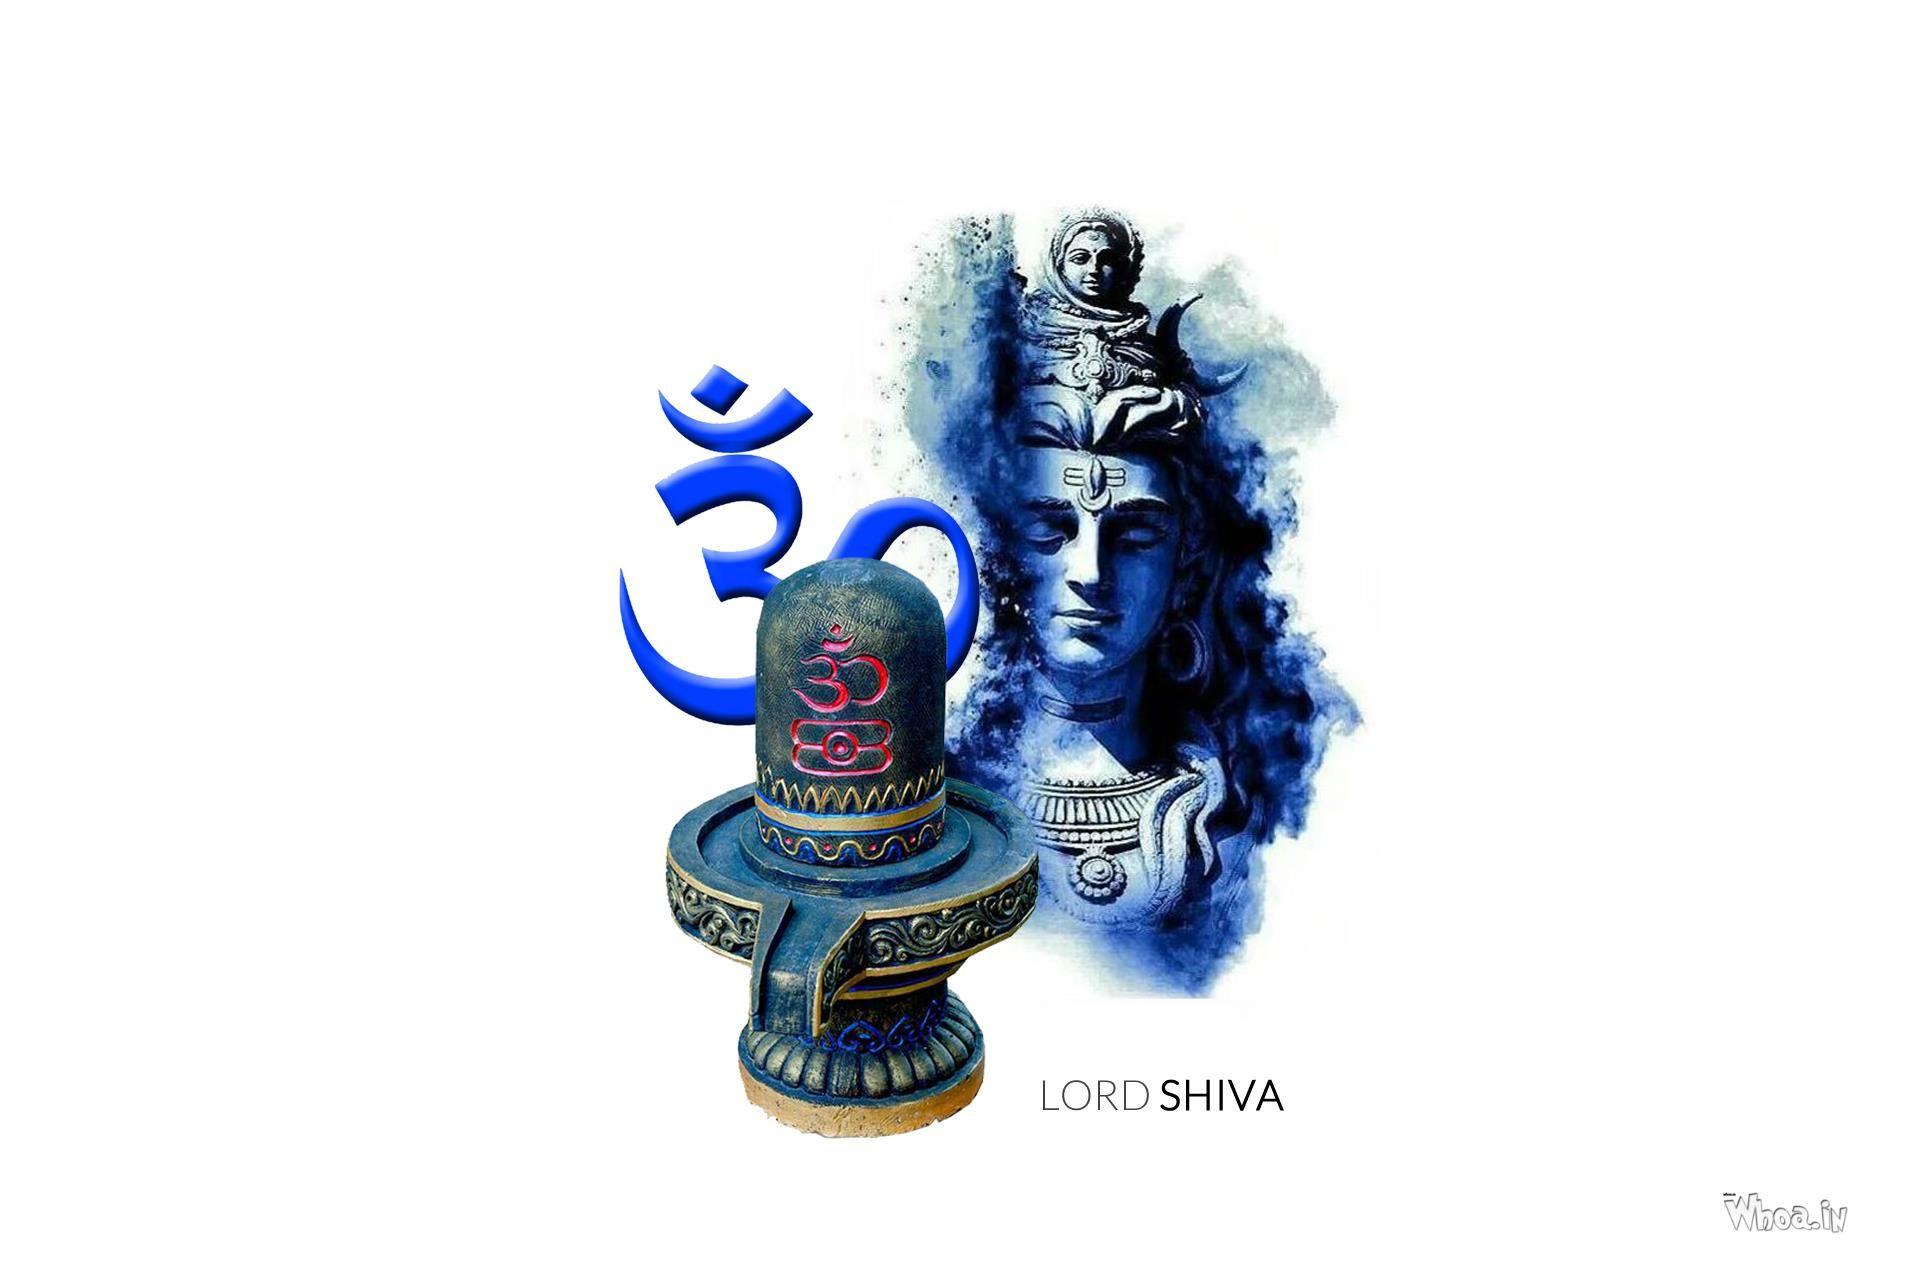 Shivling Wallpapers Top Free Shivling Backgrounds Wallpaperaccess High quality sticker png images in pngegg, all of these png images have transparent background. shivling wallpapers top free shivling